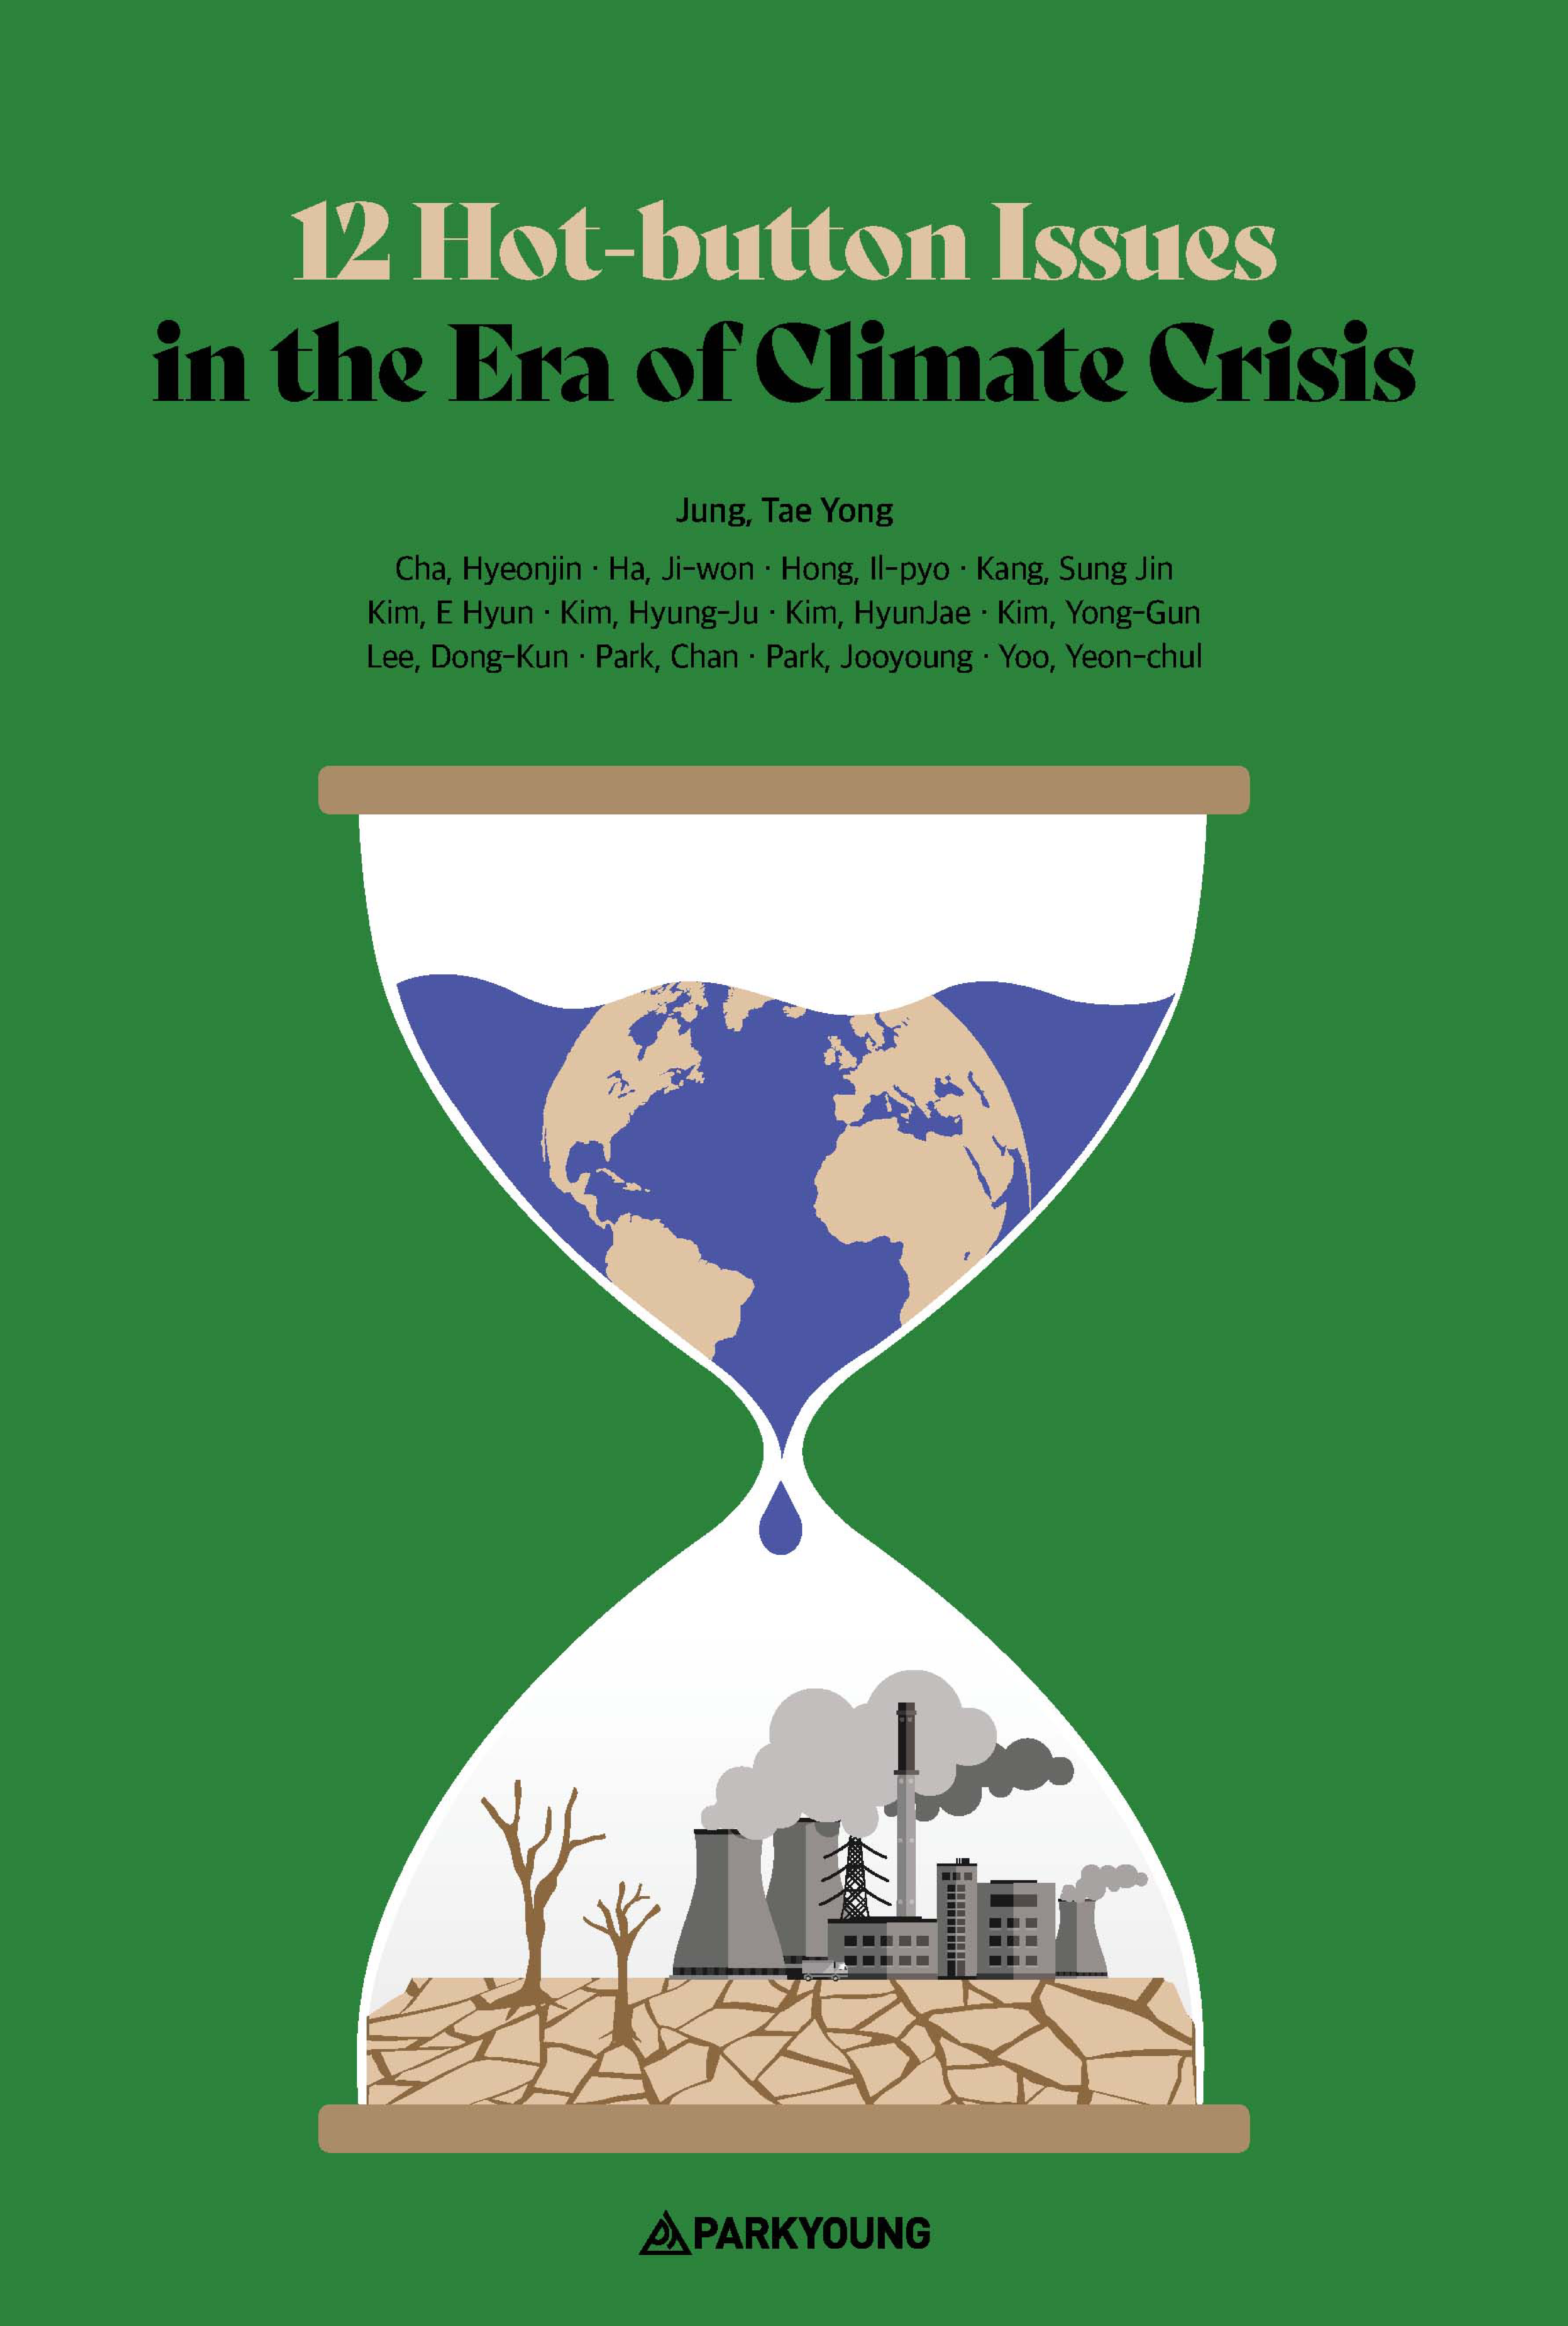 12 Hot-button Issues in the Era of Climate Crisis